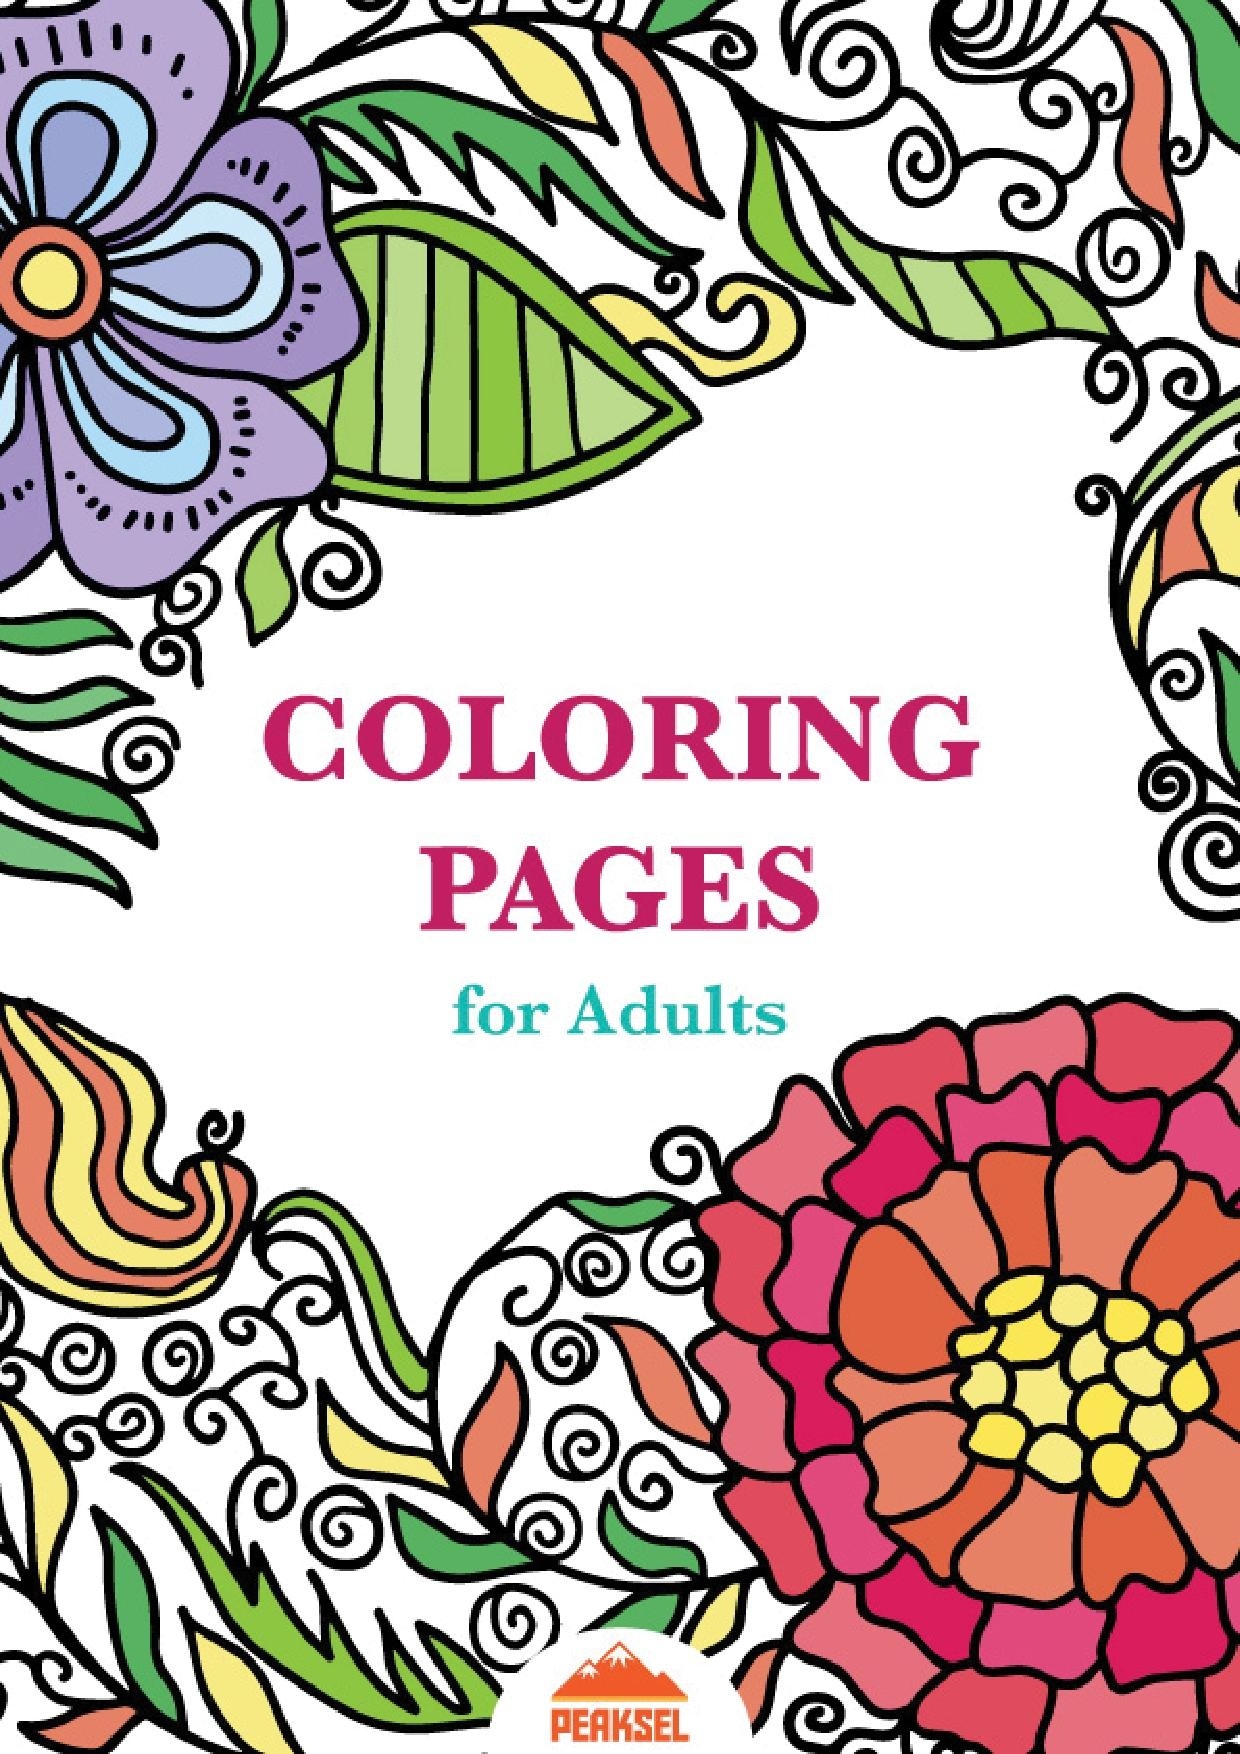 File:printable Coloring Pages For Adults - Free Adult Coloring Book - Free Printable Coloring Books Pdf